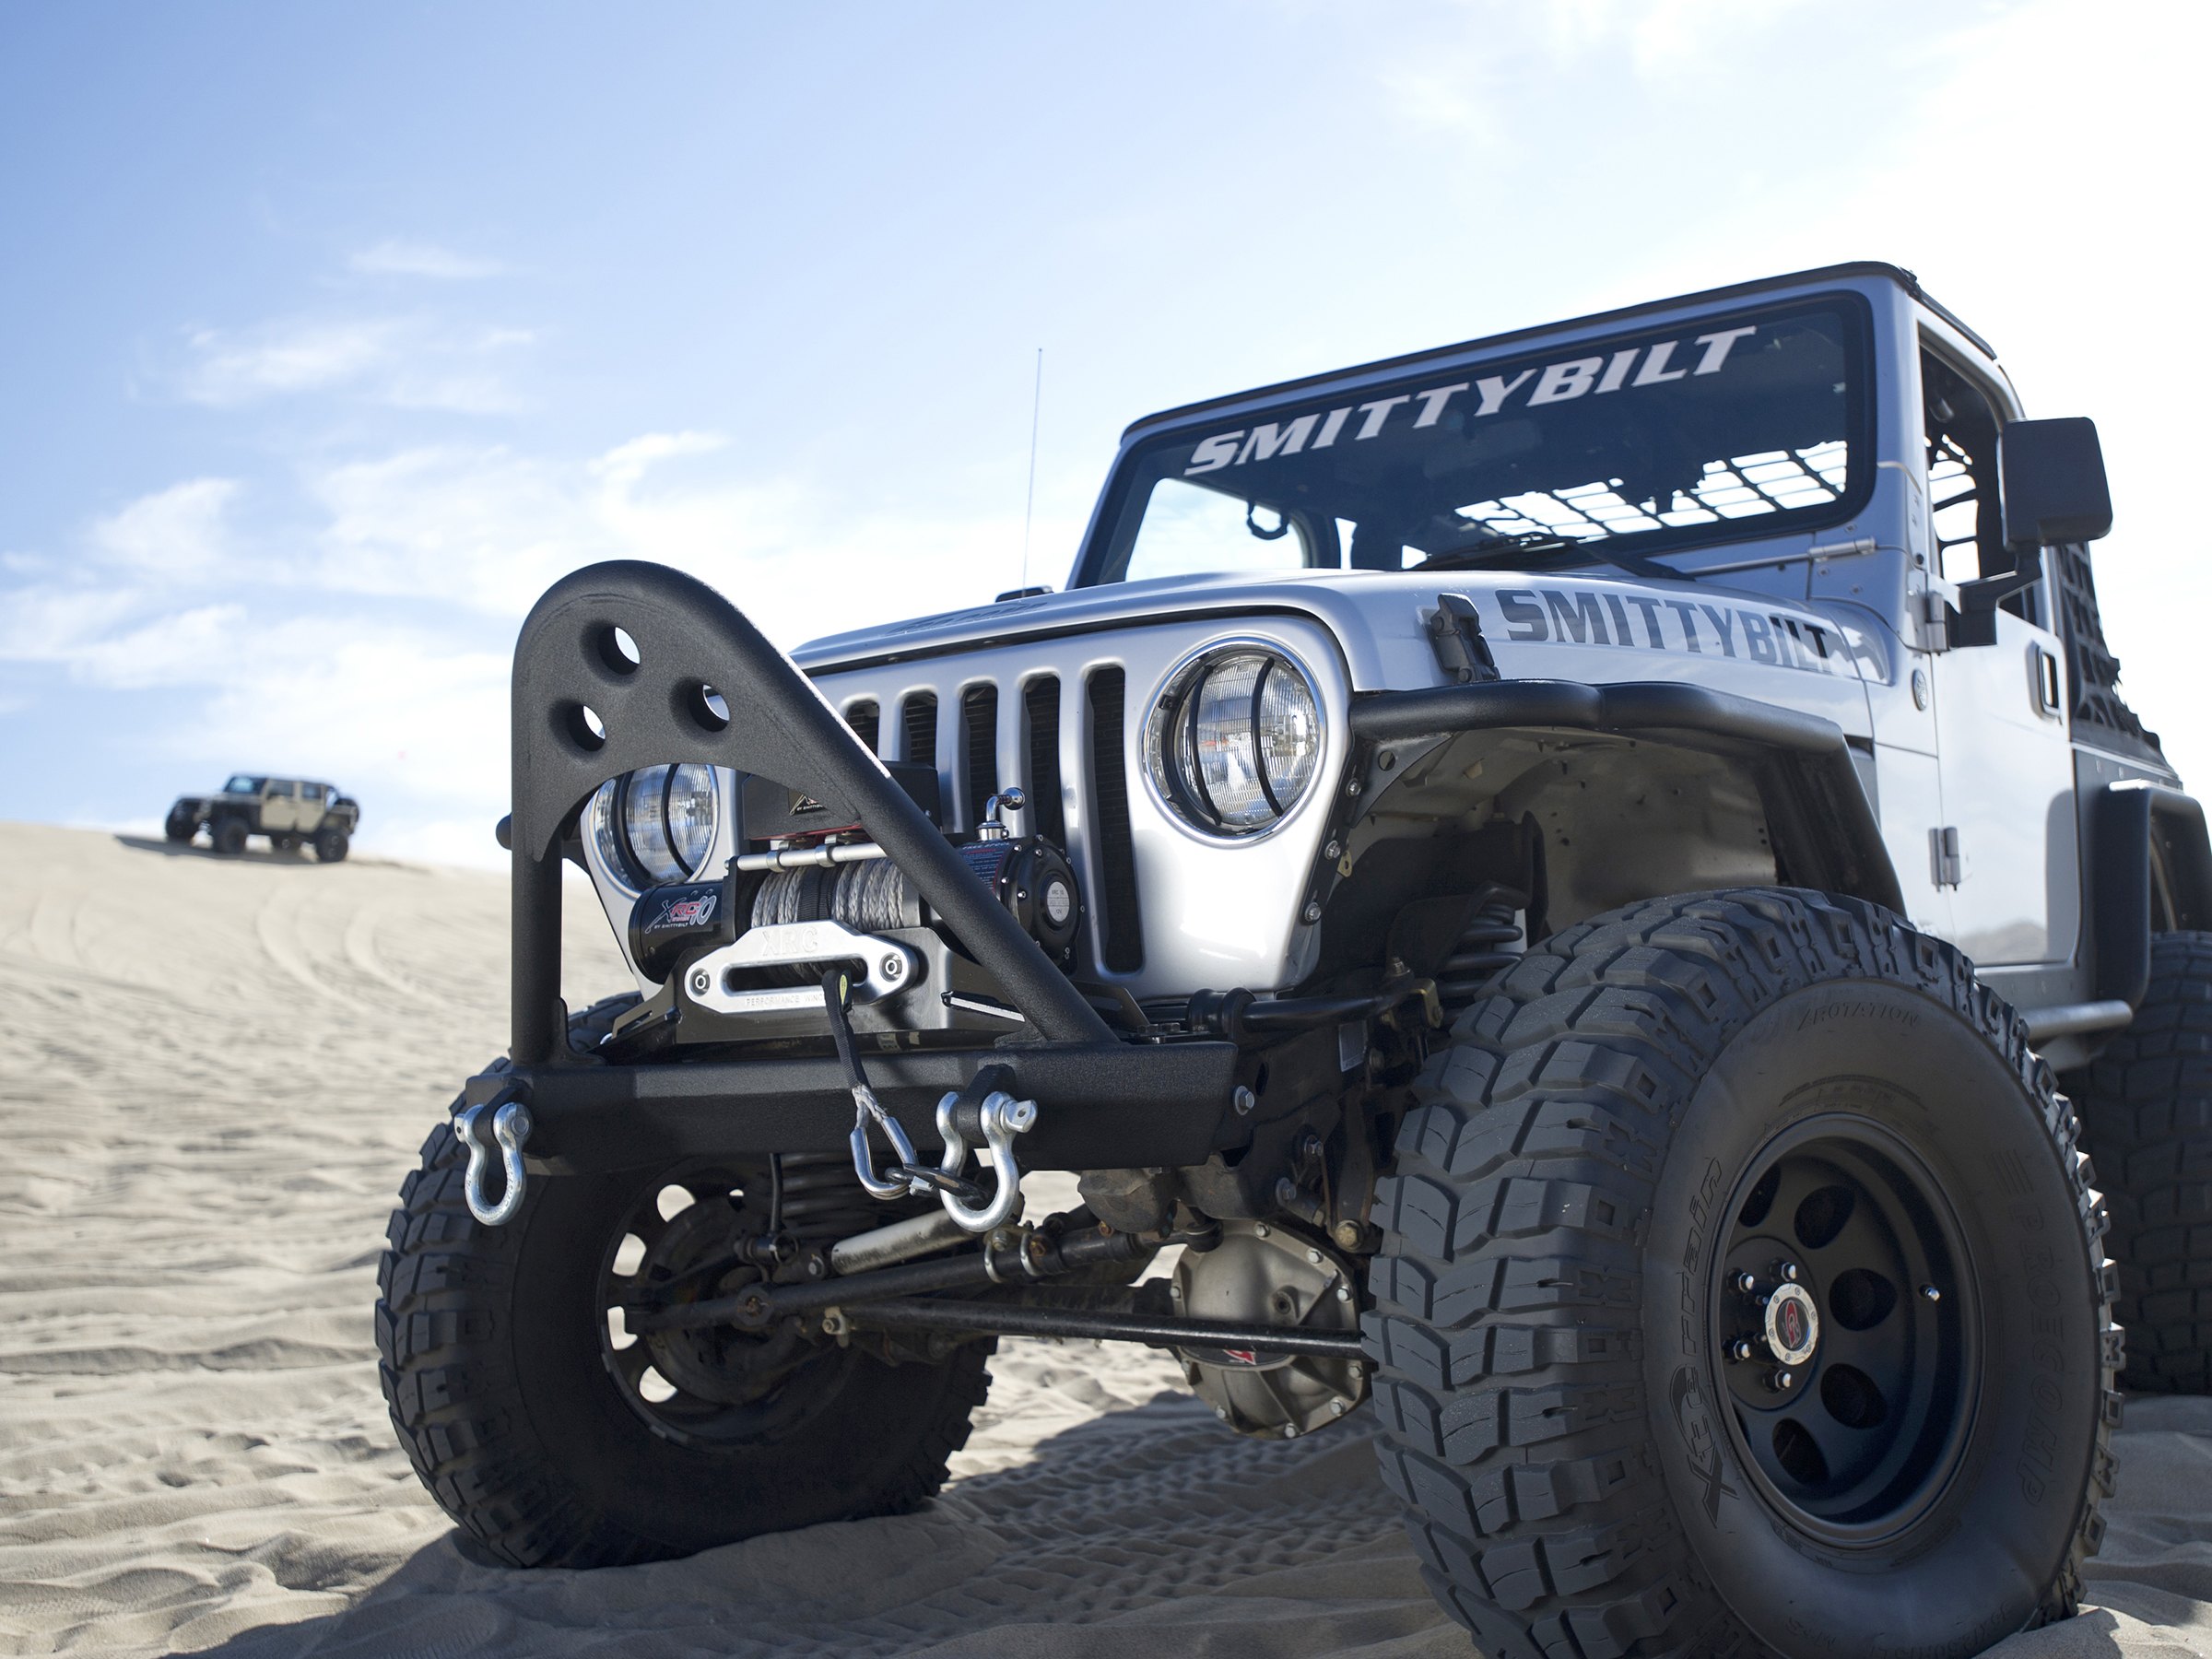 Jeep Wrangler TJ With a Stinger Bumper - Photo by Smittybilt